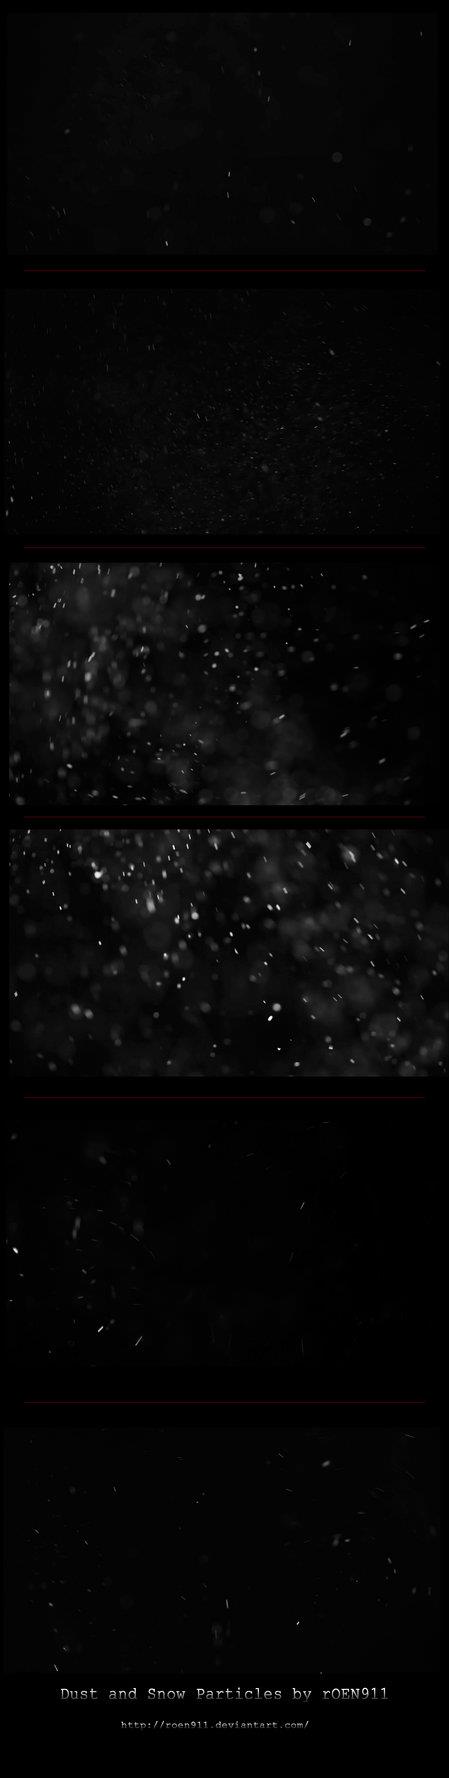 Stock Snow and dust particles by rOEN911 photoshop resource collected by psd-dude.com from deviantart